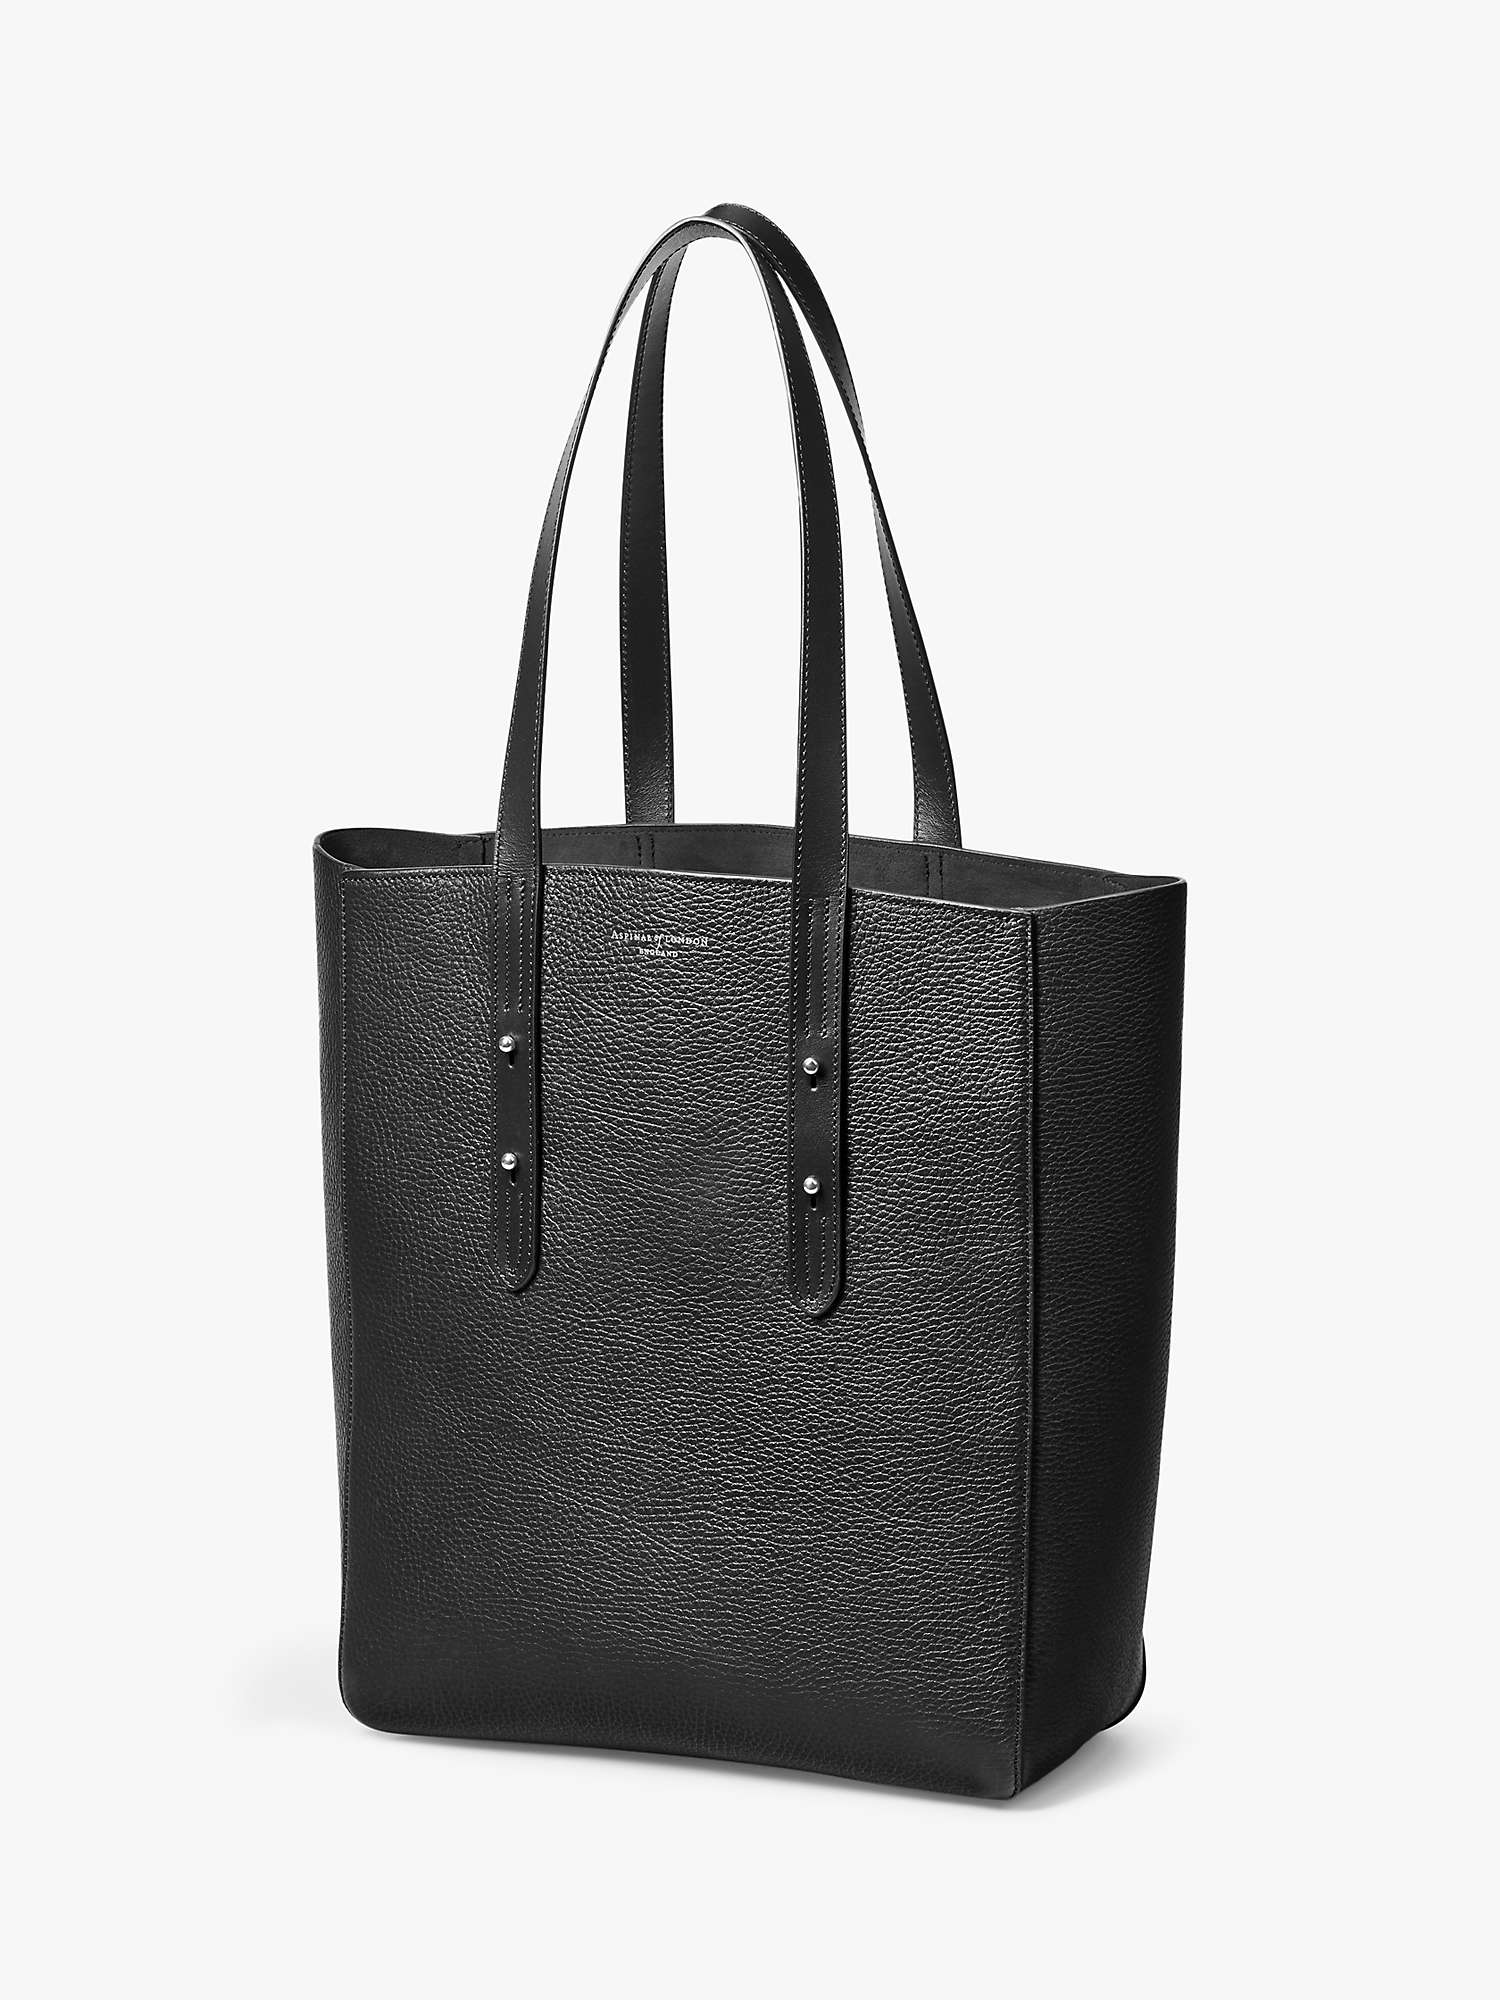 Buy Aspinal of London Essential Pebble Leather Tote Bag Online at johnlewis.com